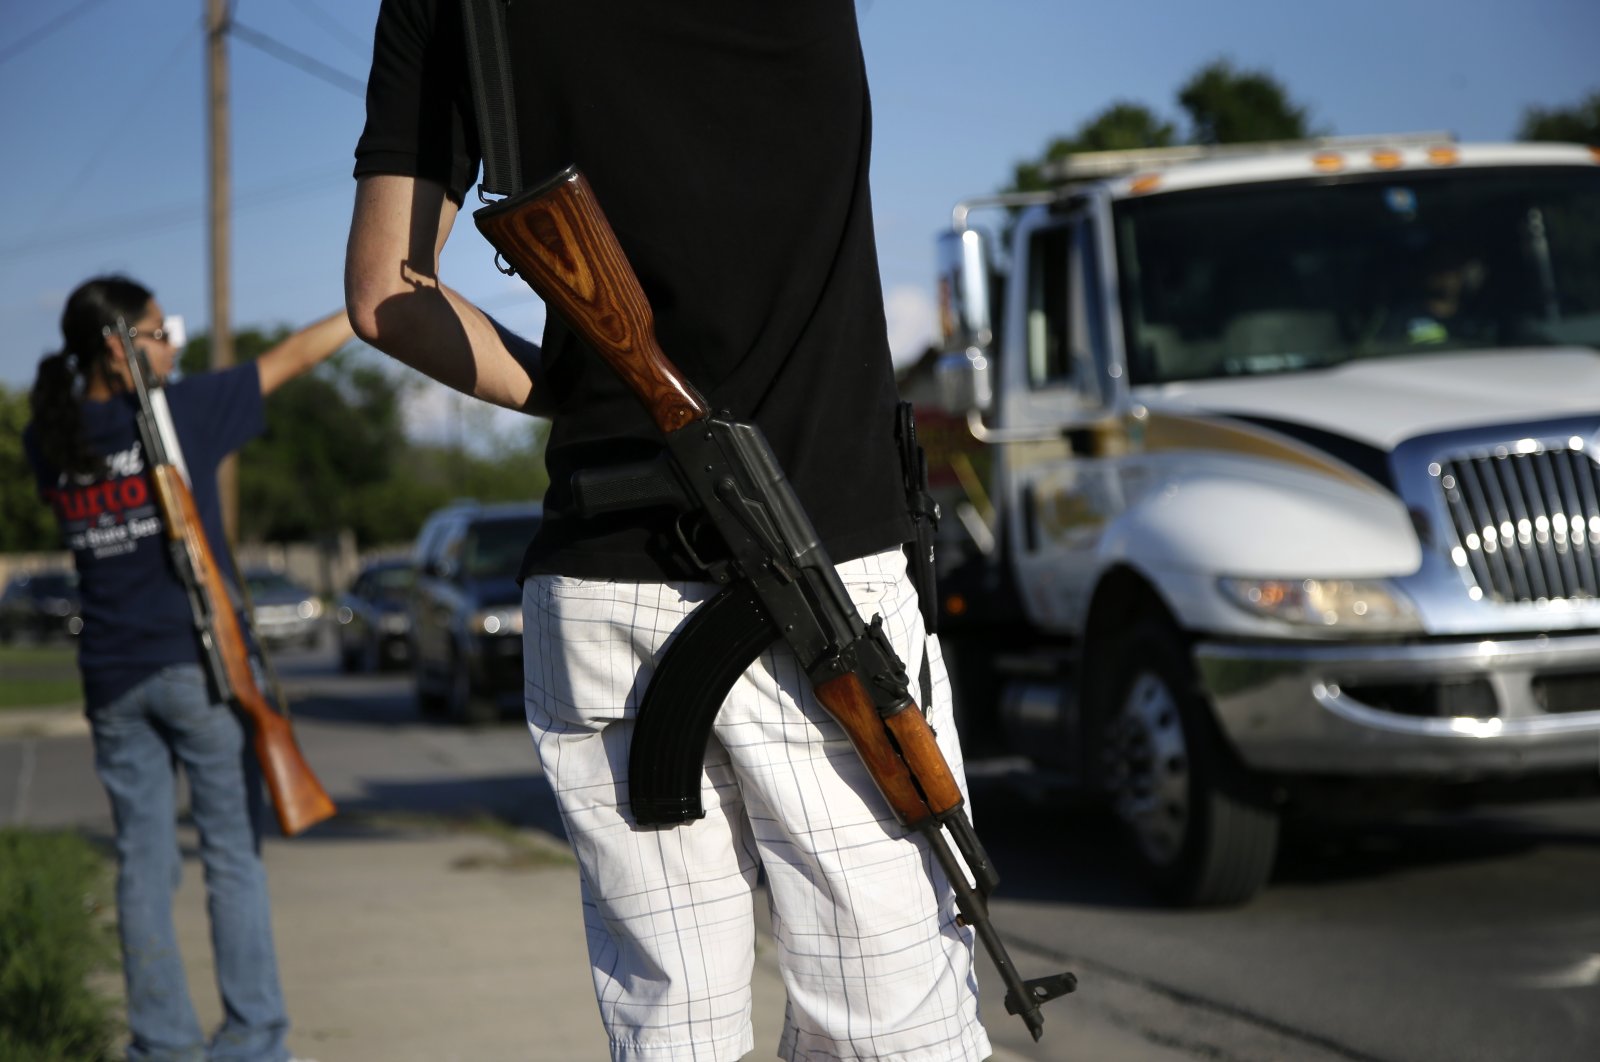 Two Texas gun rights advocates carry military-style assault rifles during a protest, in Haltom City, Texas, May 29, 2014. (AP Photo)